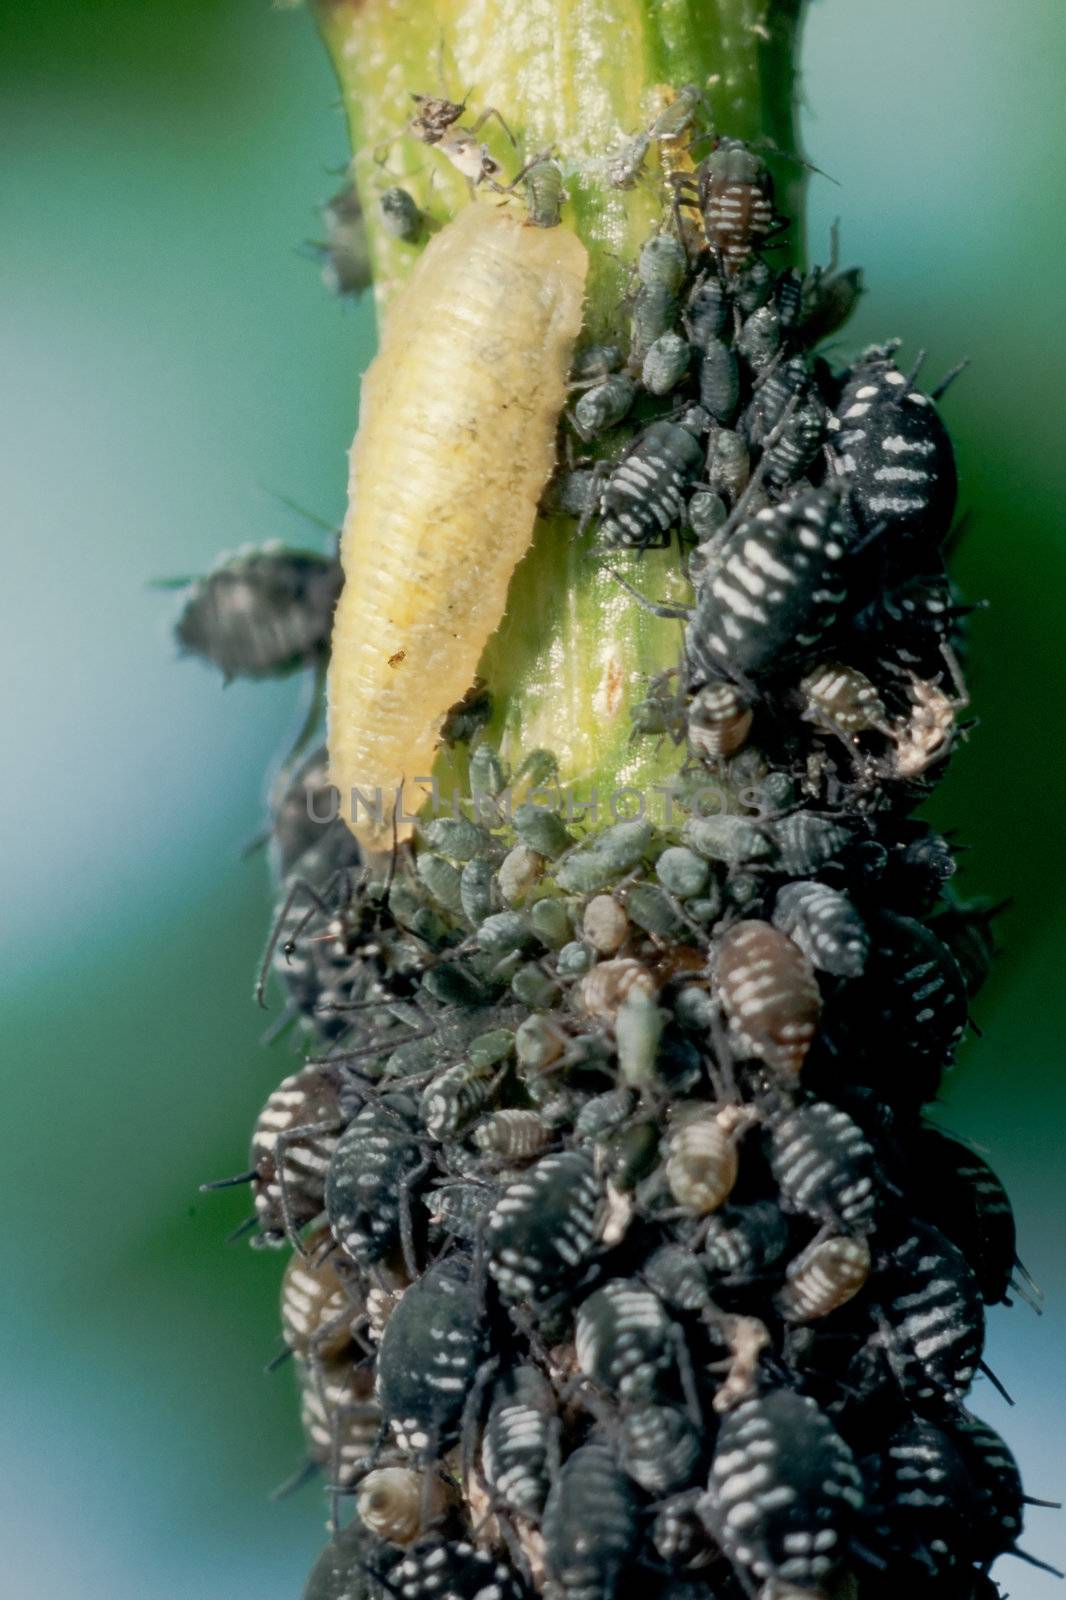 Hoverfly larva feeding on aphids by PiLens